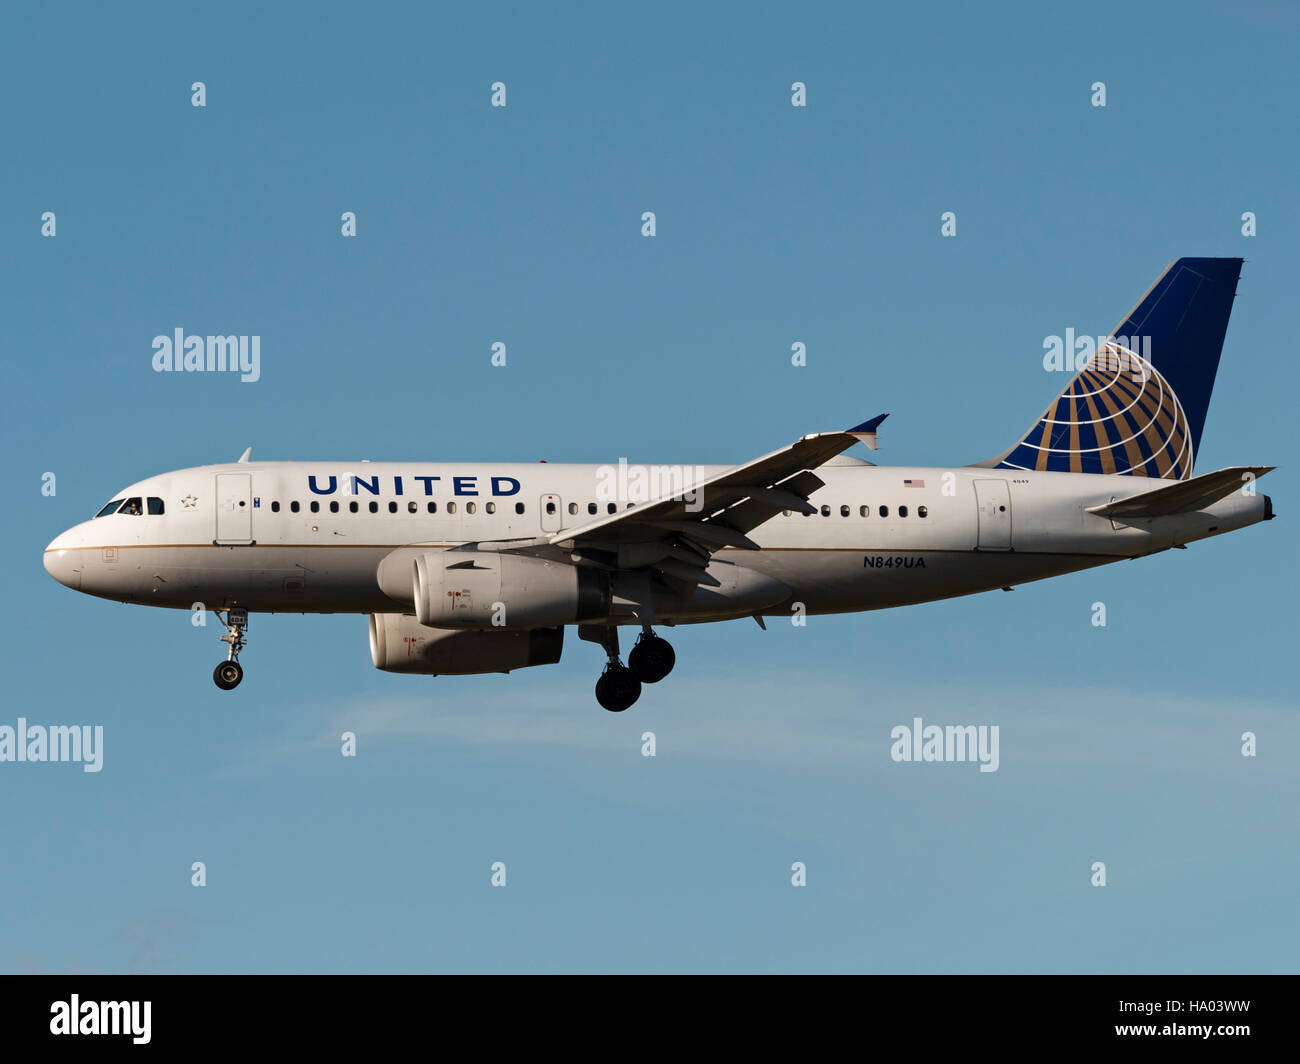 United Airlines plane jet airplane airliner Airbus A319 airborne final approach landing jetliner airline company aeroplane Stock Photo